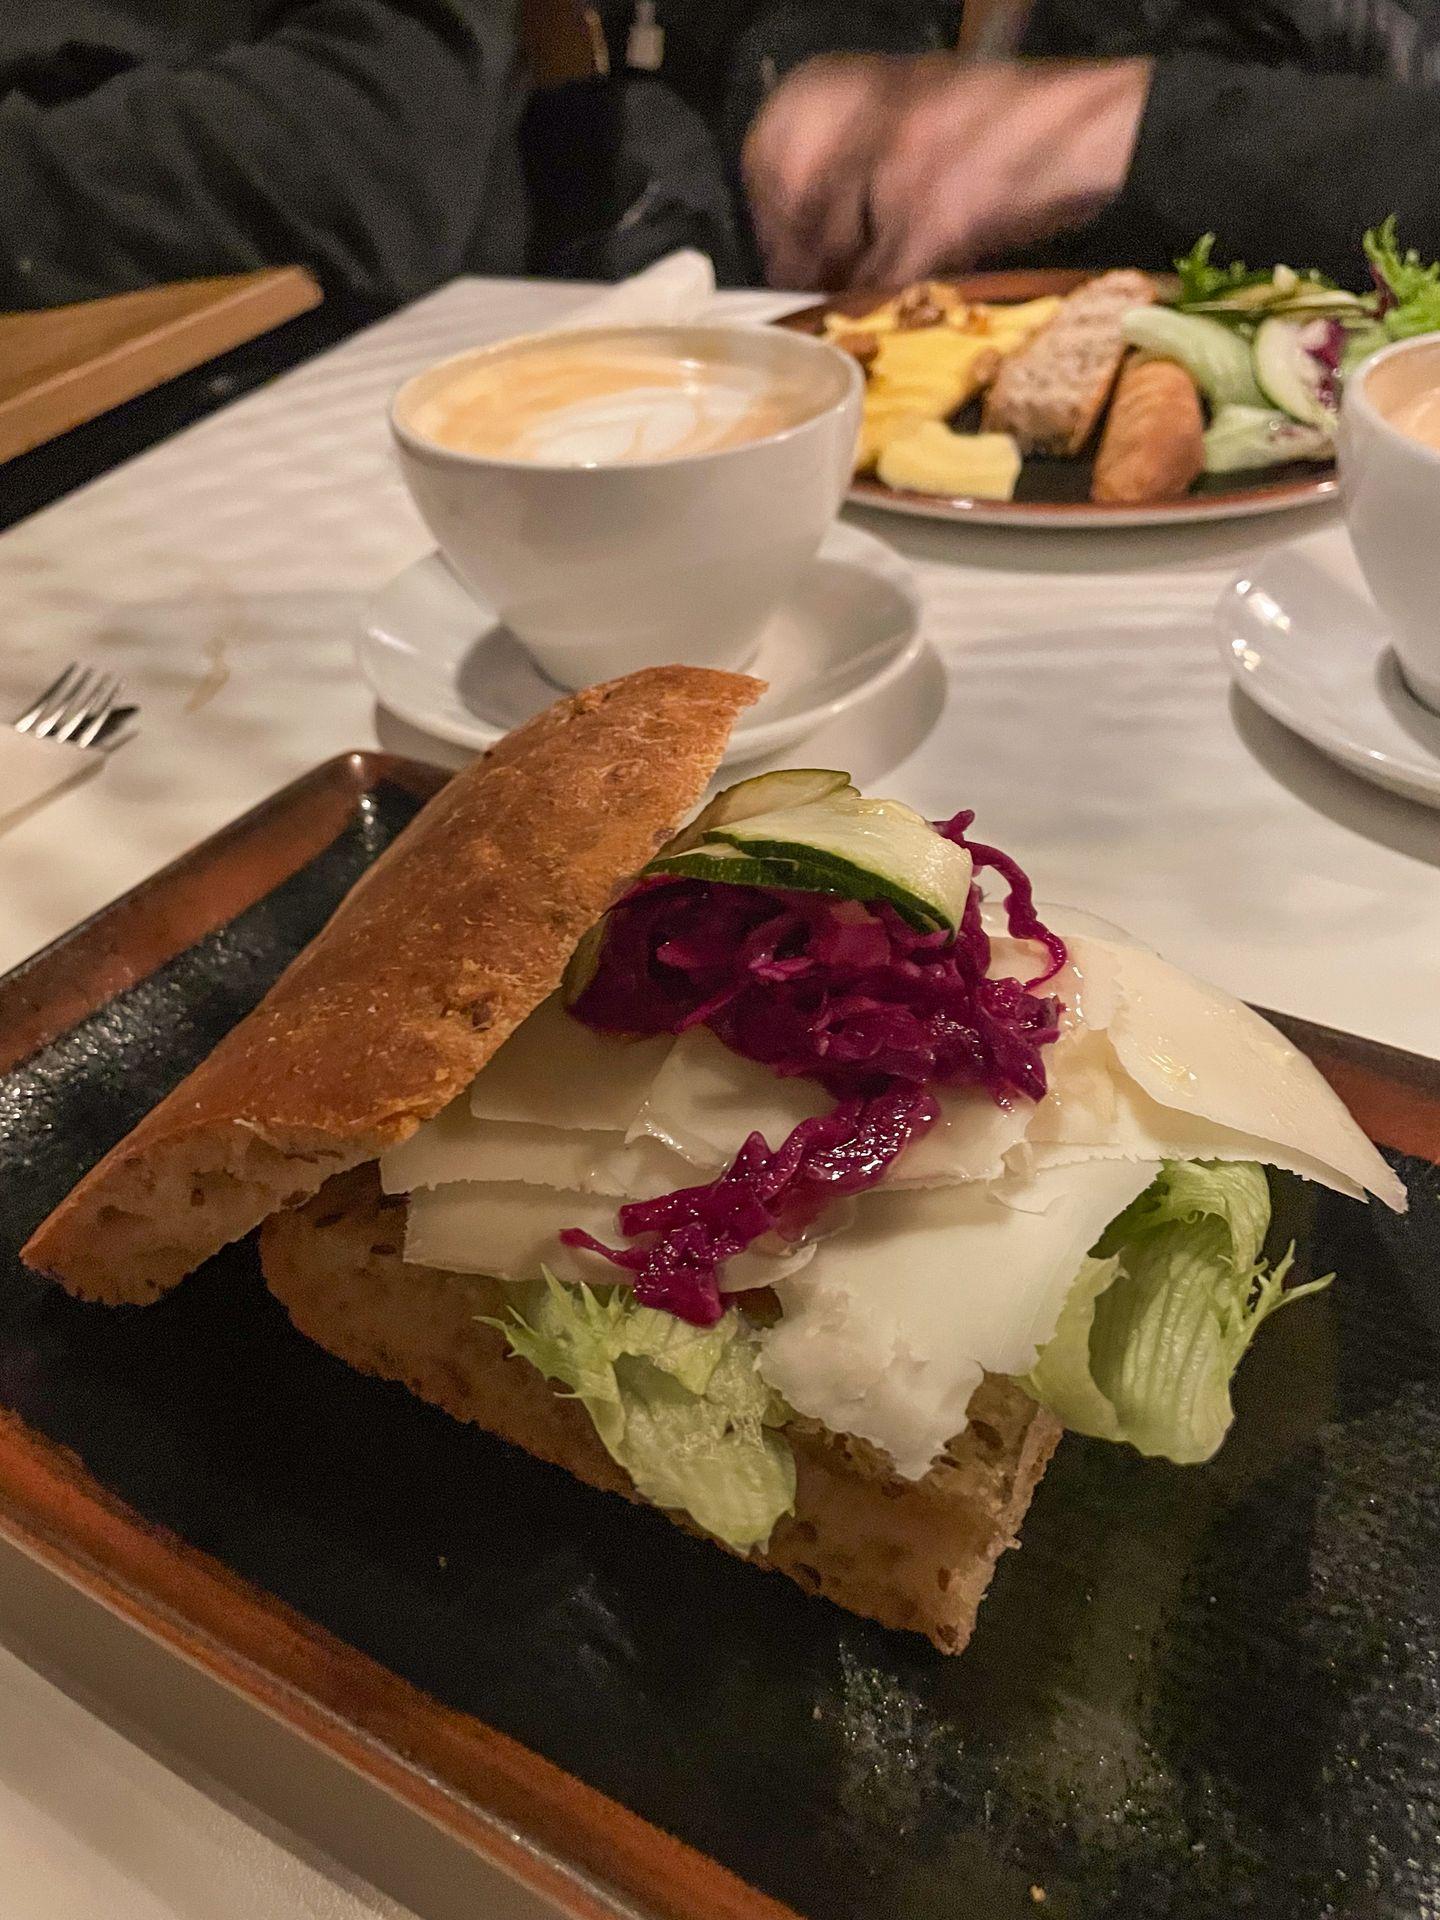 A sandwich with cheese, lettuce and other items from Risø mat og kaffebar